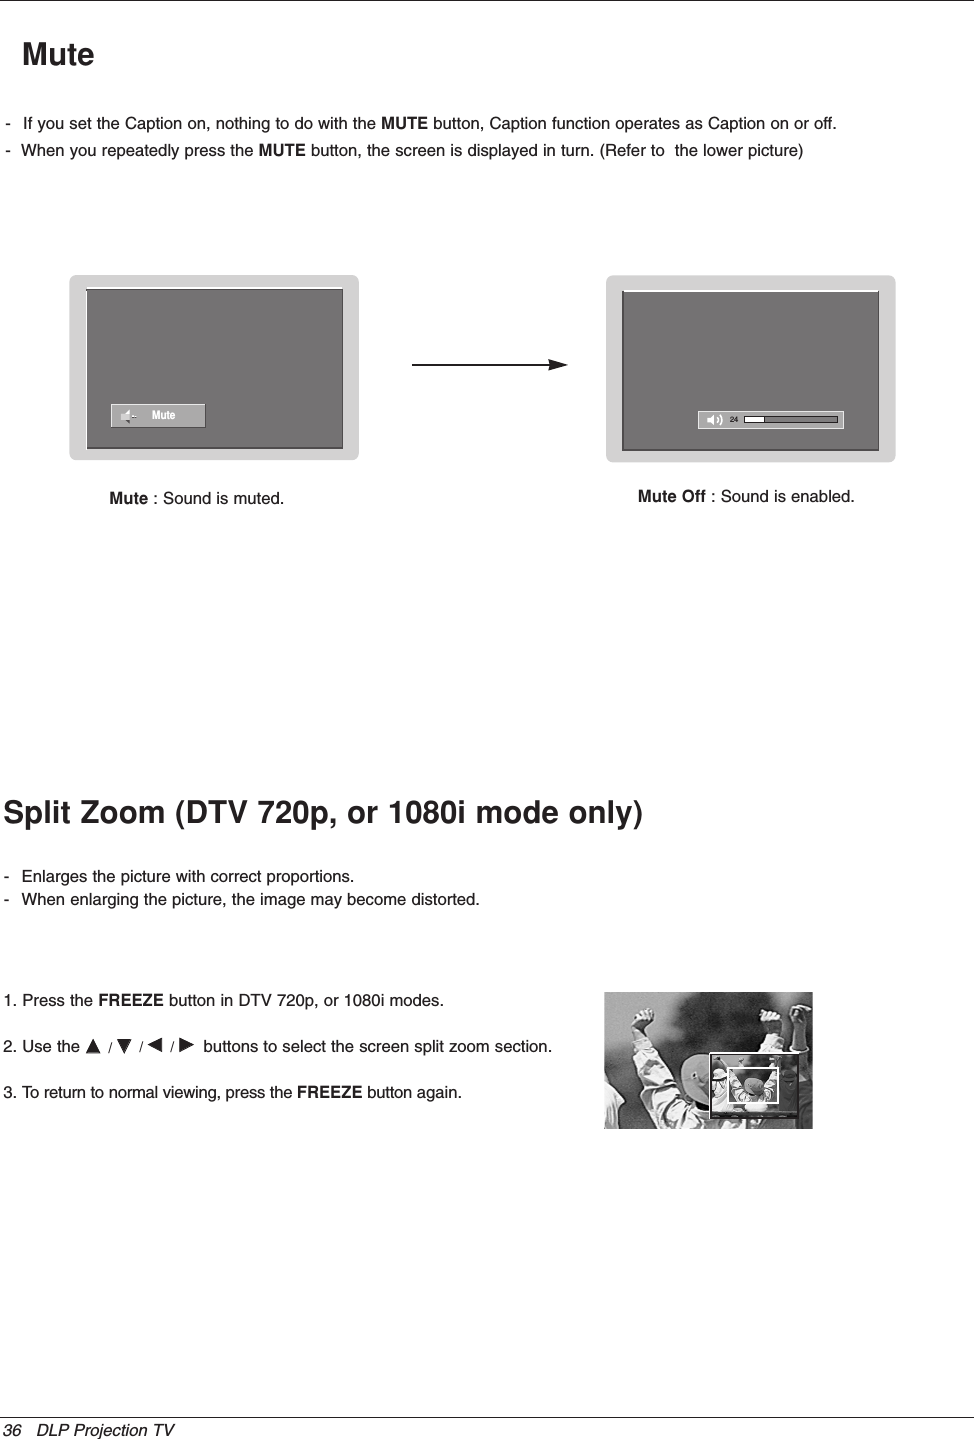 36 DLP Projection TV1. Press the FREEZE button in DTV 720p, or 1080i modes.2. Use the DD  / EE/ FF  / GGbuttons to select the screen split zoom section.3. To return to normal viewing, press the FREEZE button again.- Enlarges the picture with correct proportions.- When enlarging the picture, the image may become distorted.- If you set the Caption on, nothing to do with the MUTE button, Caption function operates as Caption on or off.-  When you repeatedly press the MUTE button, the screen is displayed in turn. (Refer to  the lower picture) Mute24MuteMute : Sound is muted. Mute Off : Sound is enabled.Split Zoom (DTV 720p, or 1080i mode only)